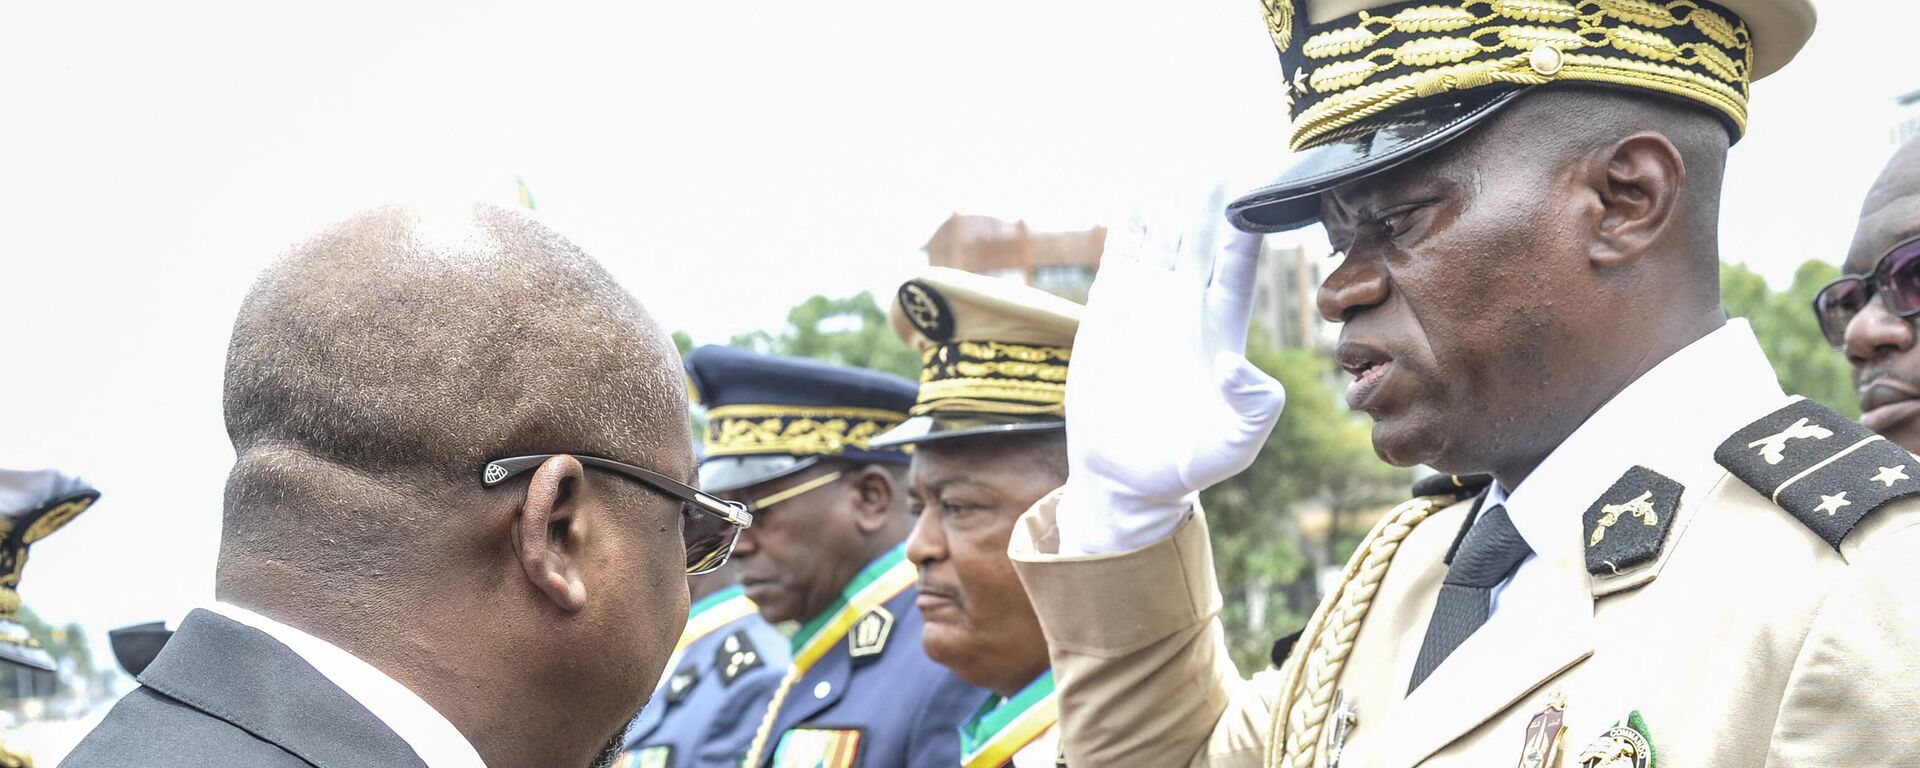 Head of Gabon's elite Republican Guard, General Brice Oligui Nguema (R), is decorated by Gabon Prime Minister Alain Claude Bilie Bie Nze (L) in Libreville on August 16, 2023 during celebrations ahead of Gabon Independence day celebrated on August 17, 2023. The leaders of the coup in Gabon on August 30, 2023 named Republican Guard chief General Brice Oligui Nguema transitional president, according to a TV statement, after the military seized control in the wake of elections. - Sputnik Africa, 1920, 02.09.2023